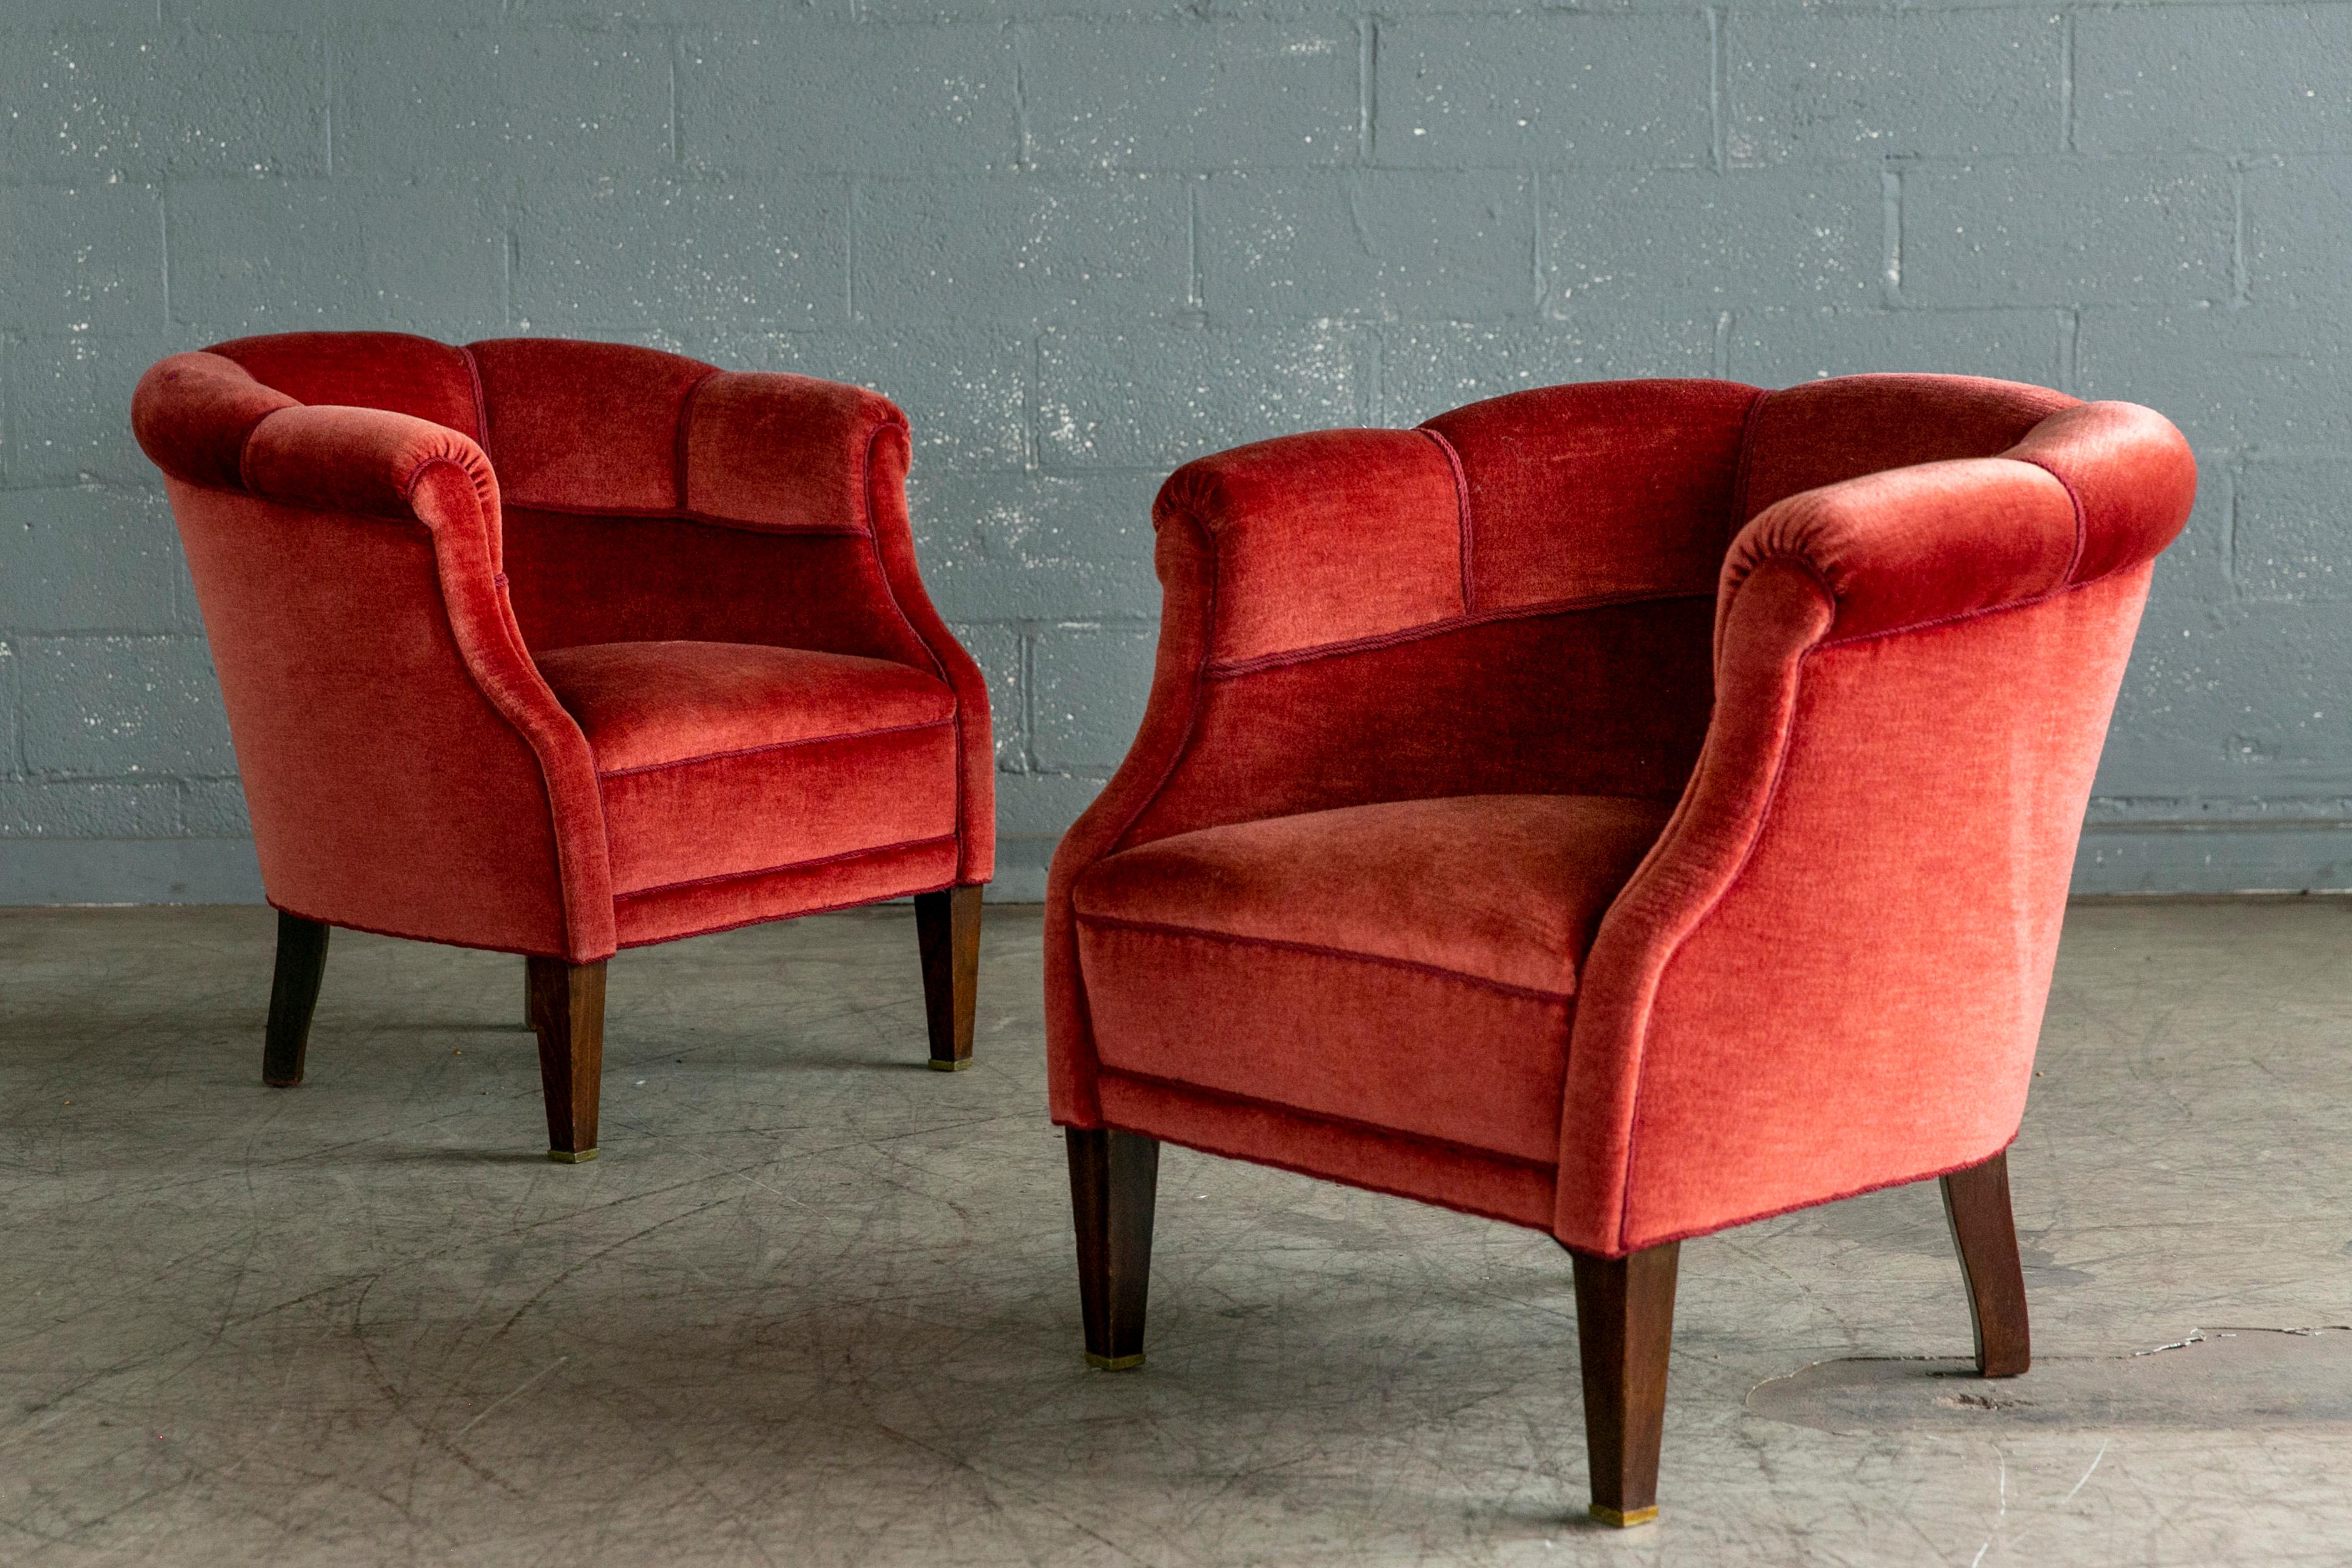 Comfortable, exuberant, and ultracool pair of Danish lounge chairs from the 1940's. We love the curved backrests and low slung organic proportions and taller less chunky mahogany legs adding a bit more elegance. The mohair fabric is in still clean